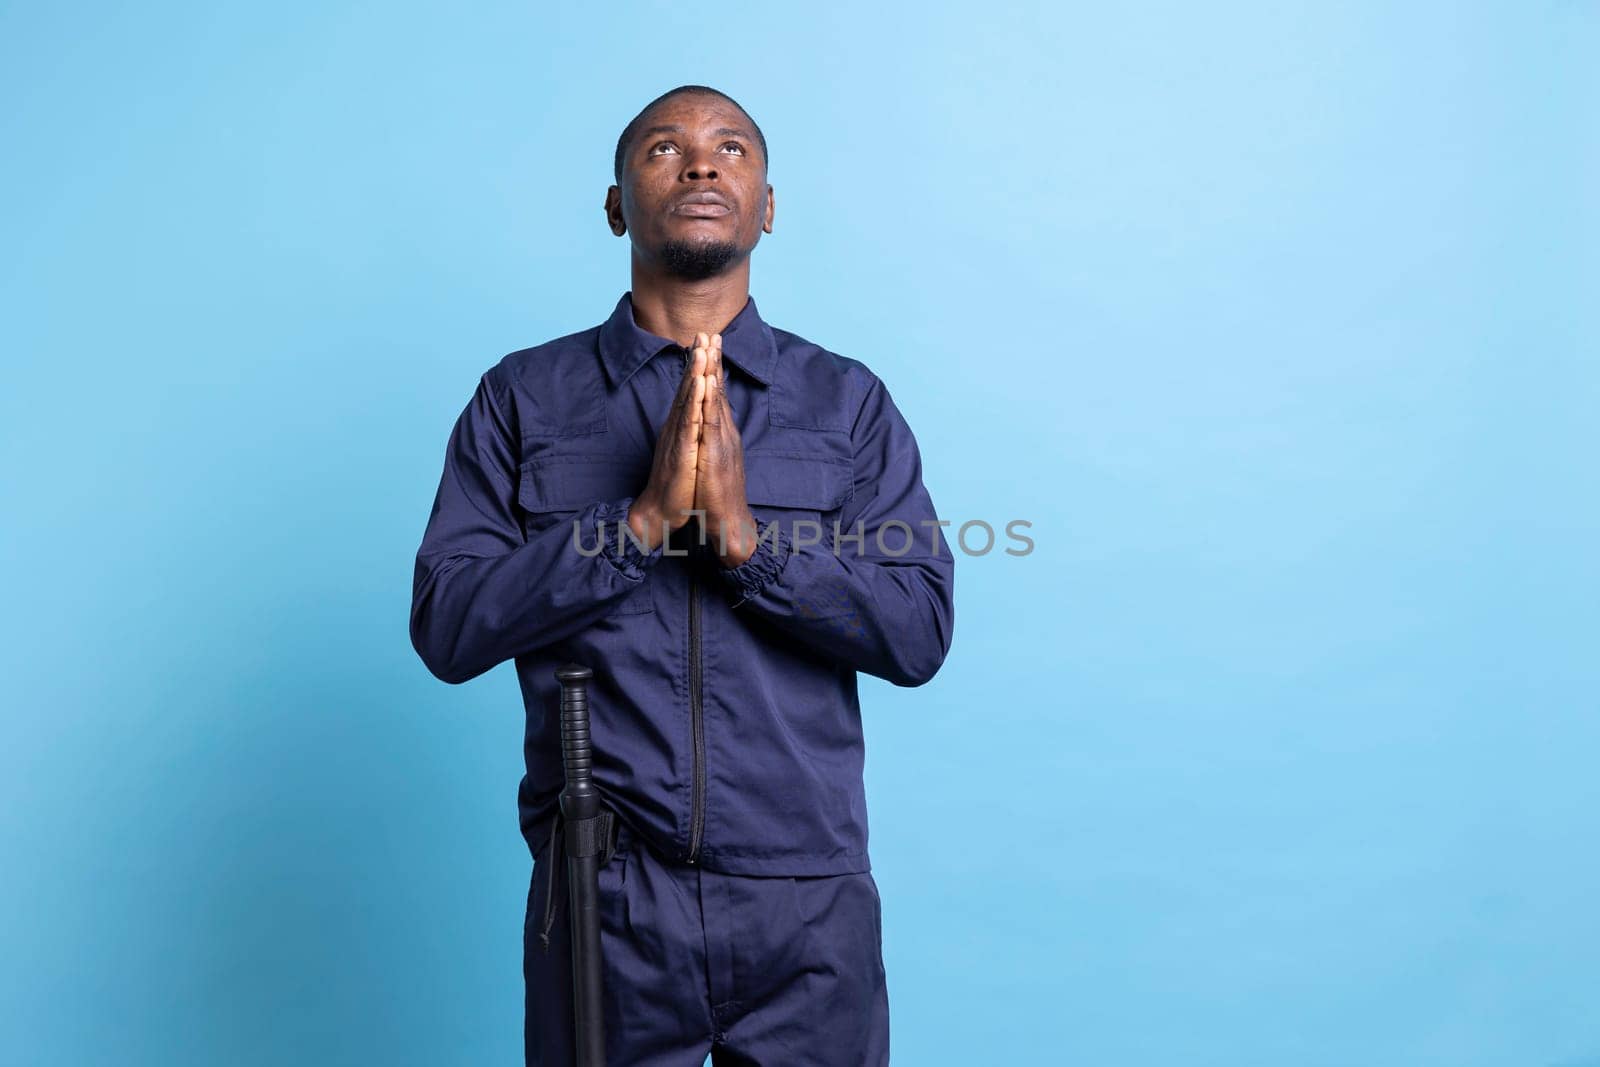 Religious security agent praying to God and having faith against blue background, saying a prayer to help and protect him. Young adult with spiritual beliefs talking to Jesus Christ on camera.